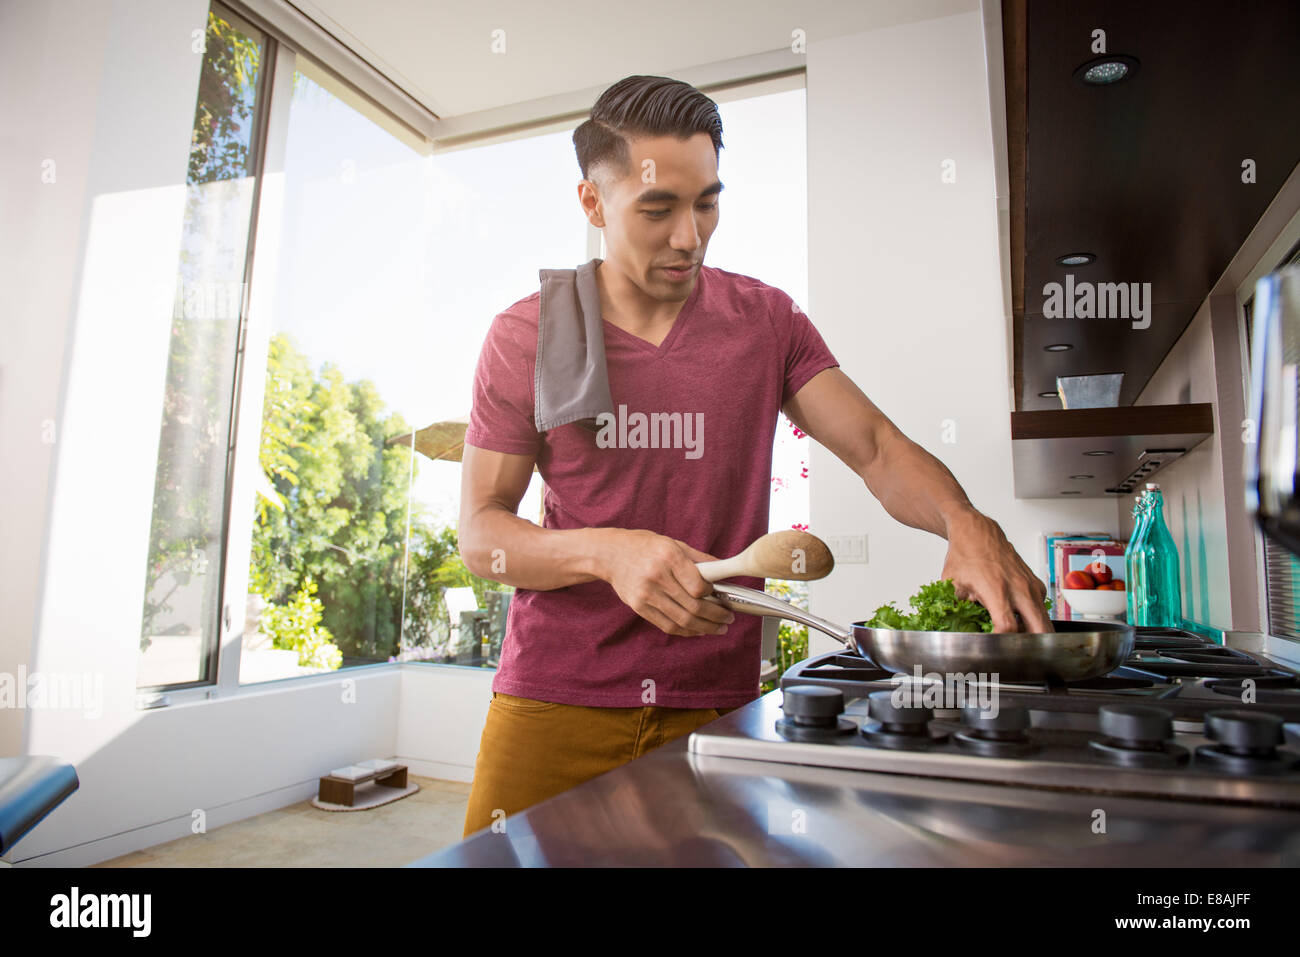 Young man cooking on hob in kitchen Stock Photo